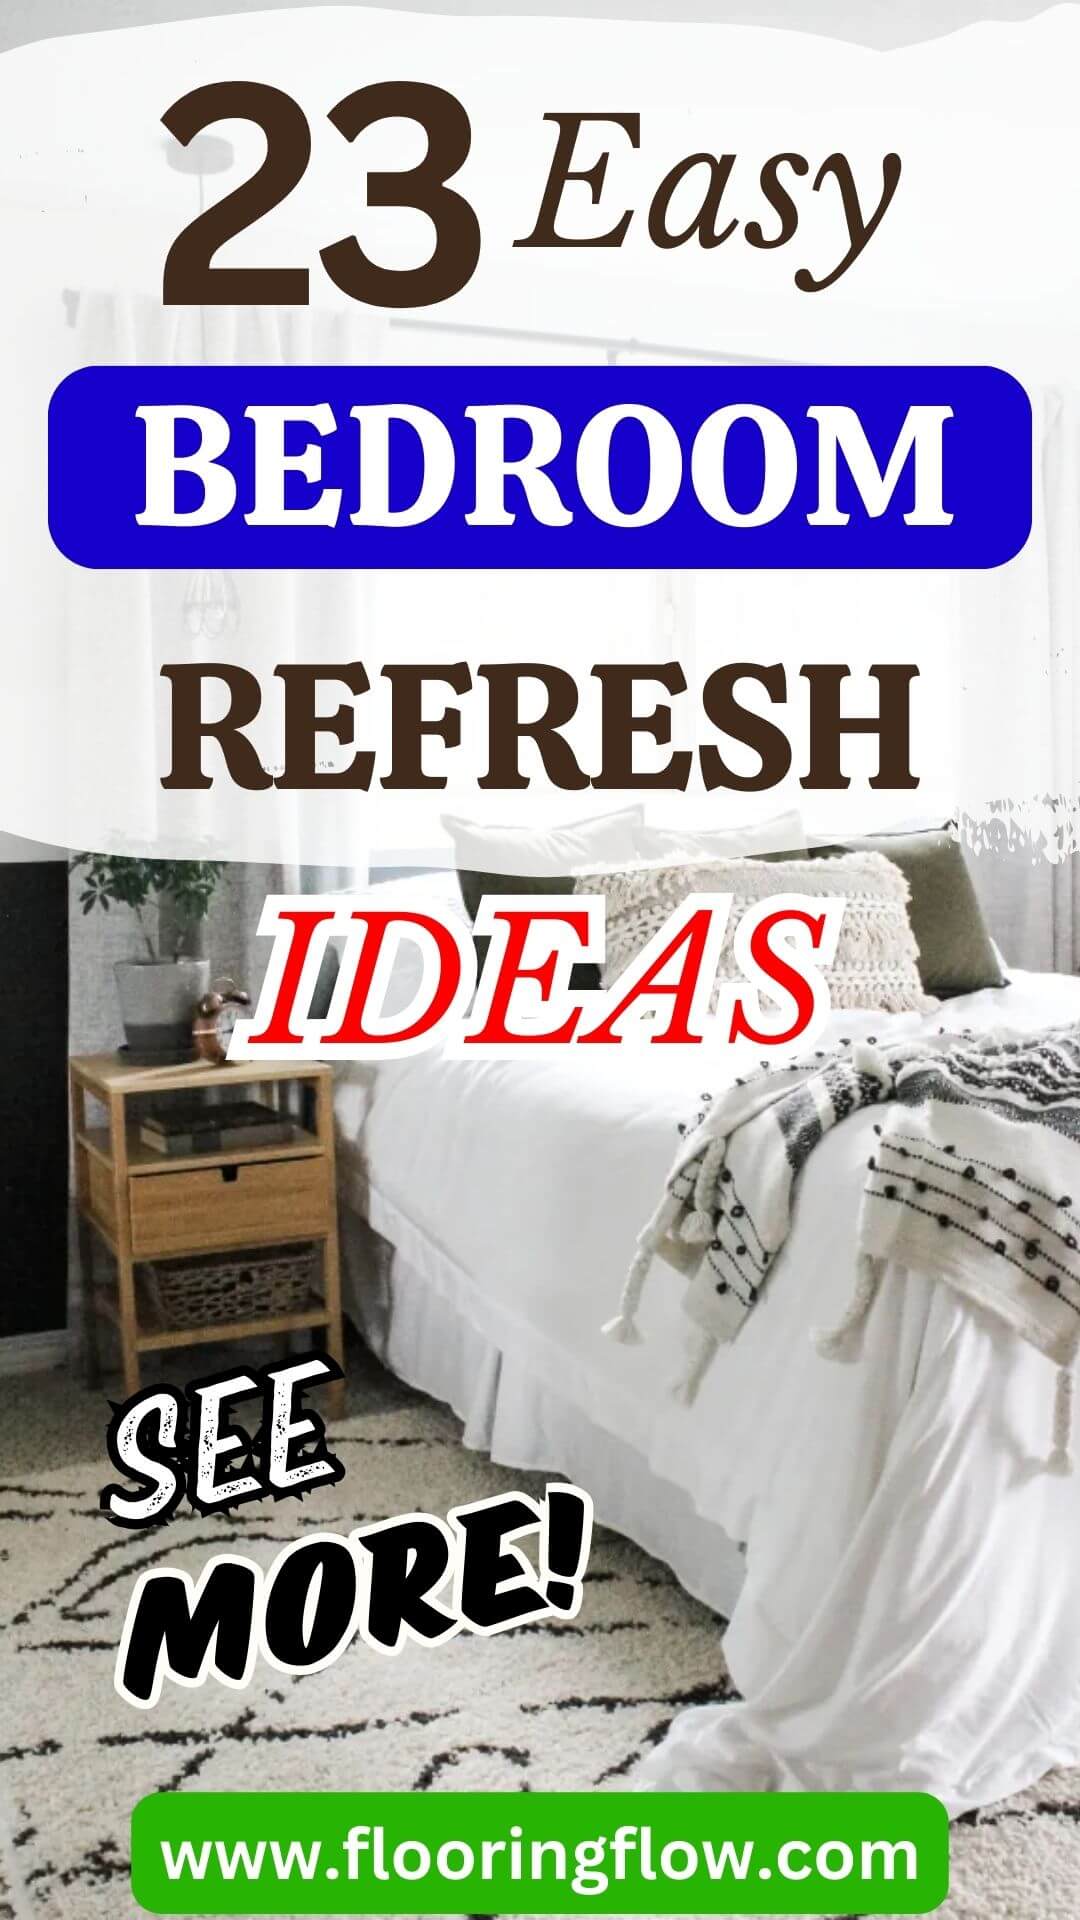 Easy Bedroom Refresh Ideas with Simple Upgrades